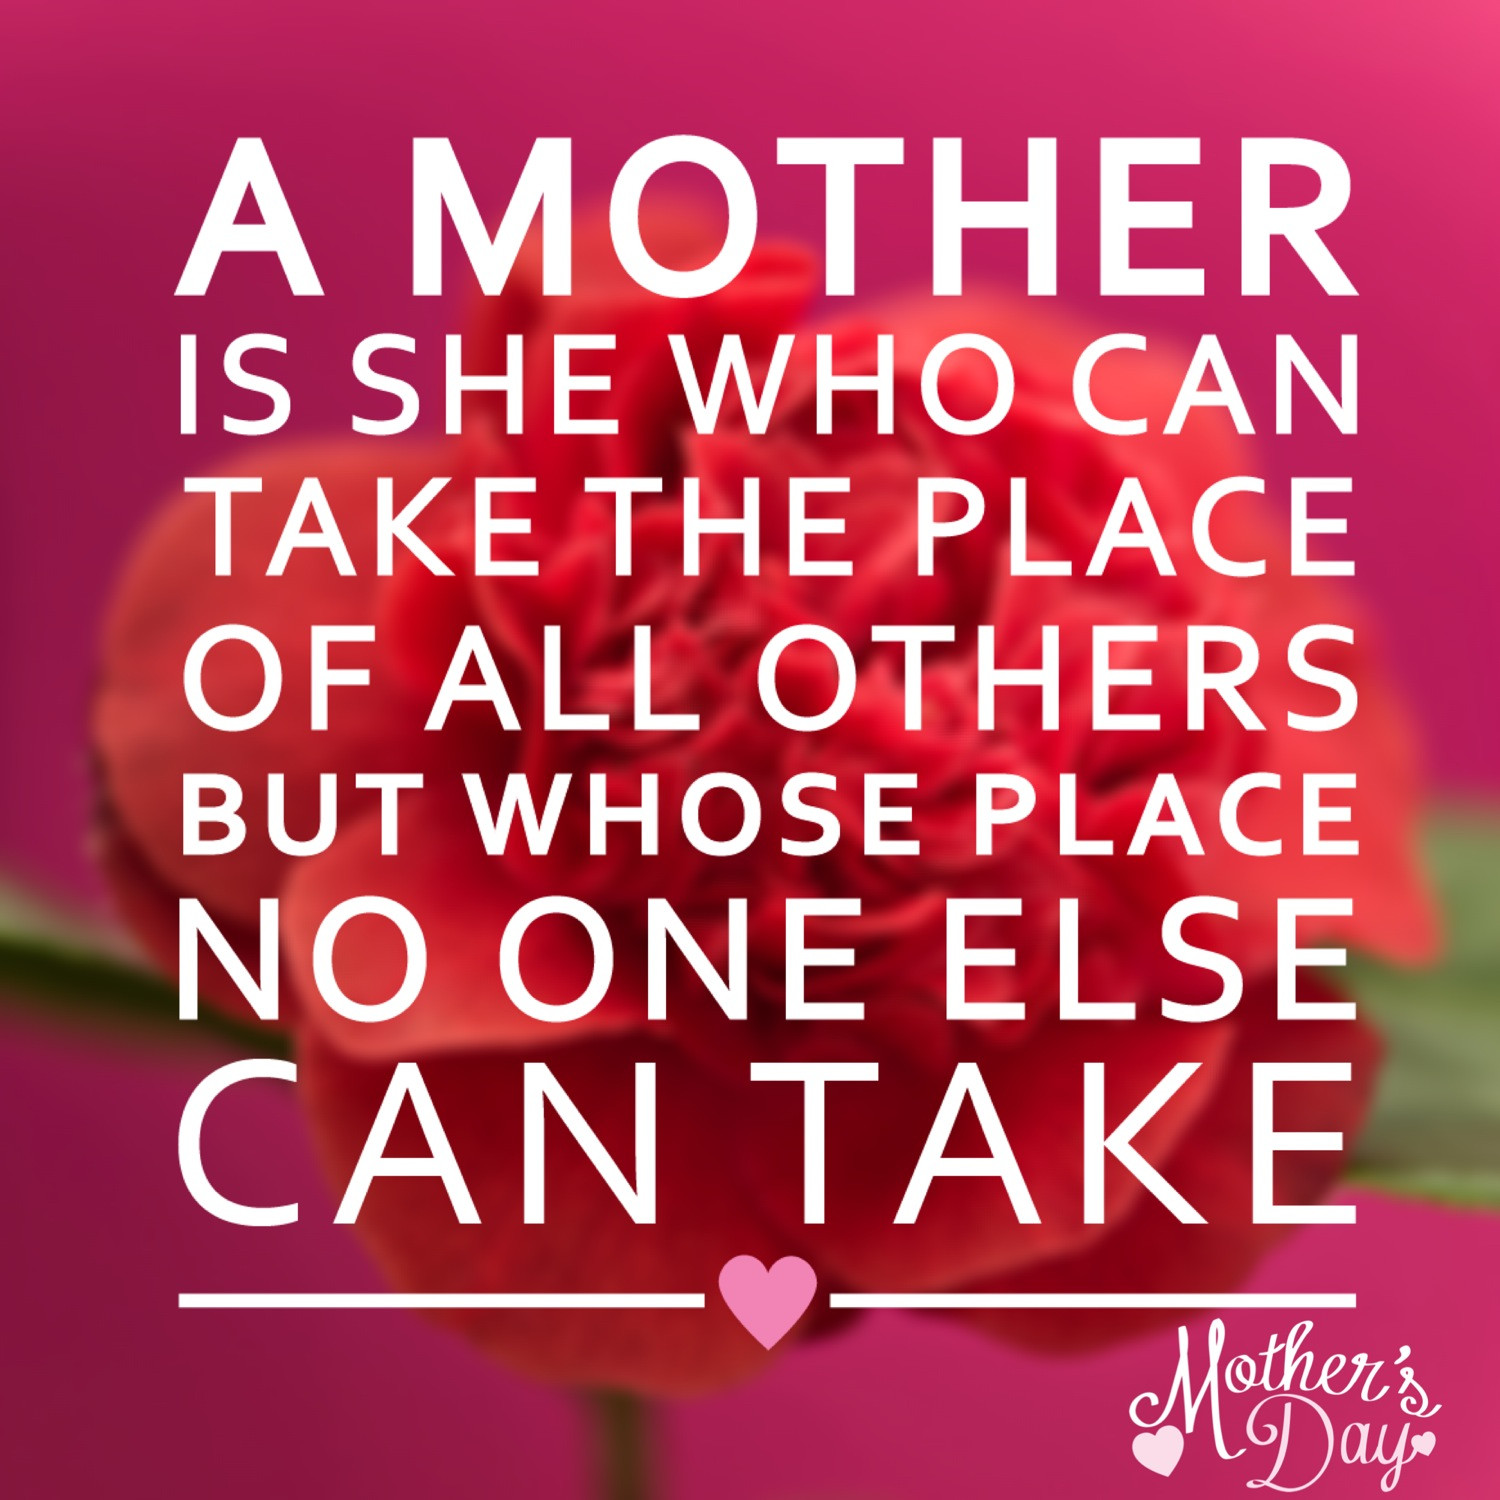 Happy Mothers Day Quotes And Images
 10 FUN Things You Can Do With Mom Mother s Day Tech